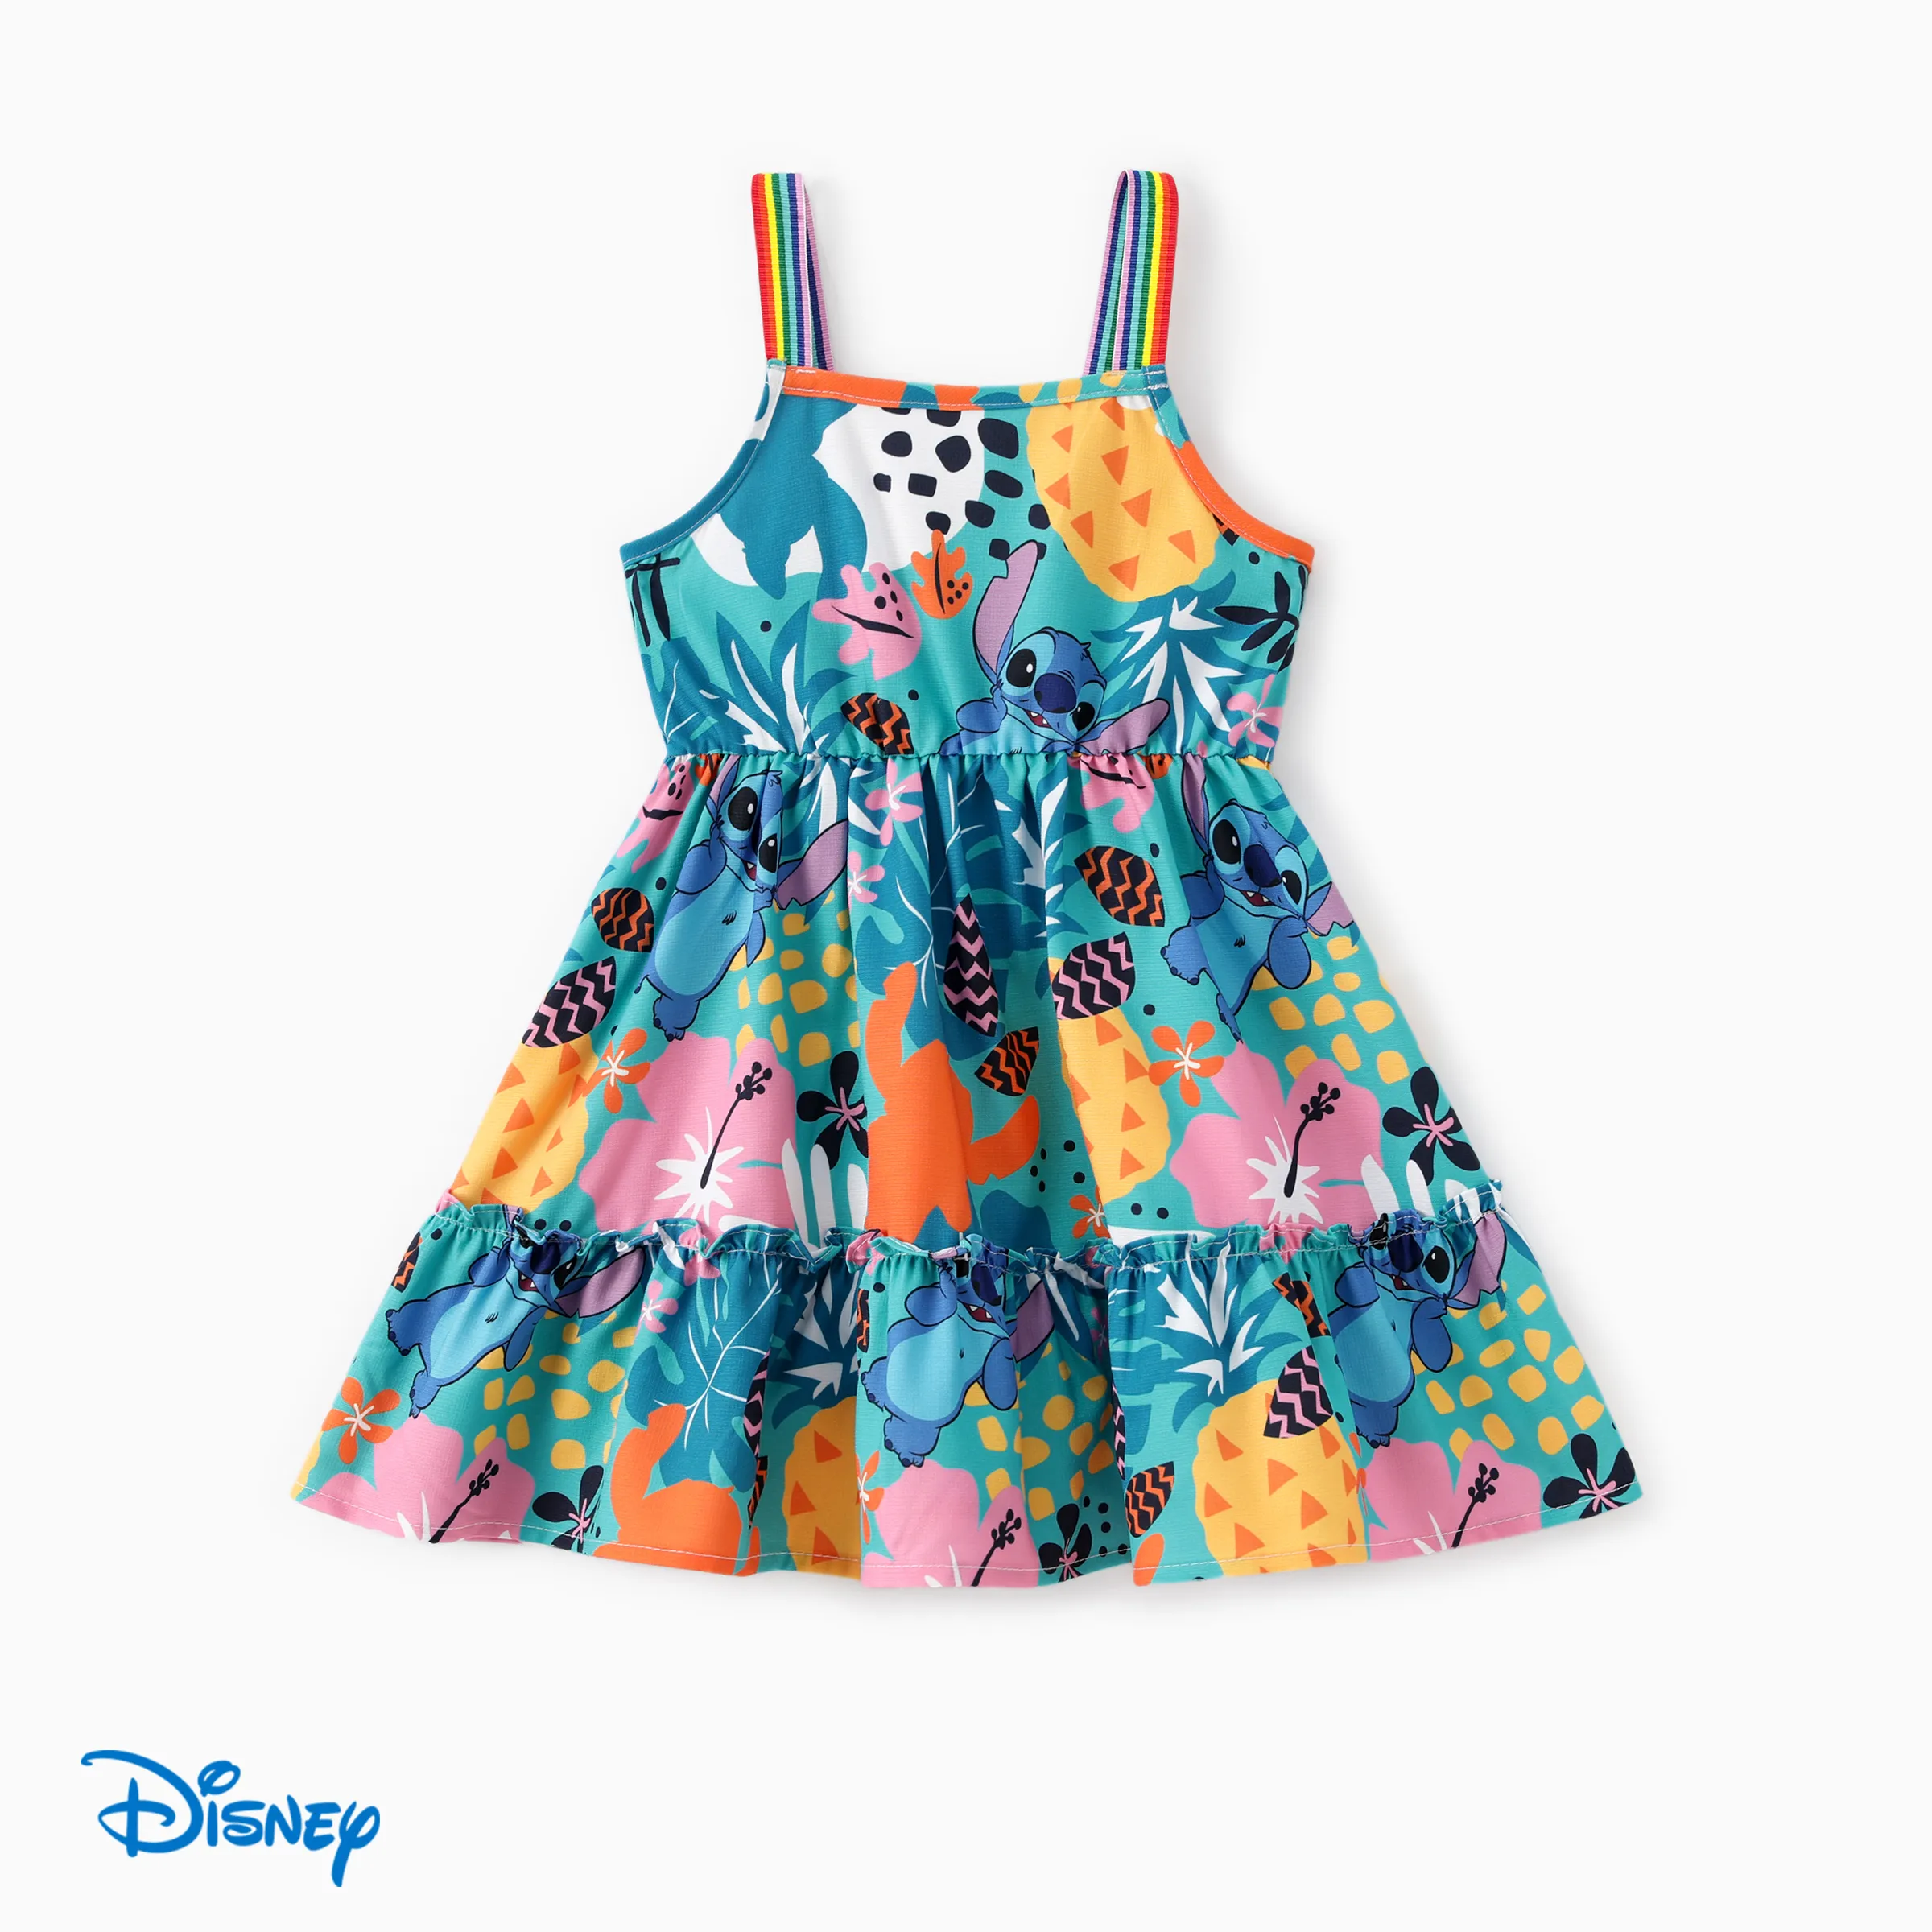 

Disney Stitch Toddler Girls 1pc Plant Characters Print with Tropical Rainforest Vibe Sleeveless Dress